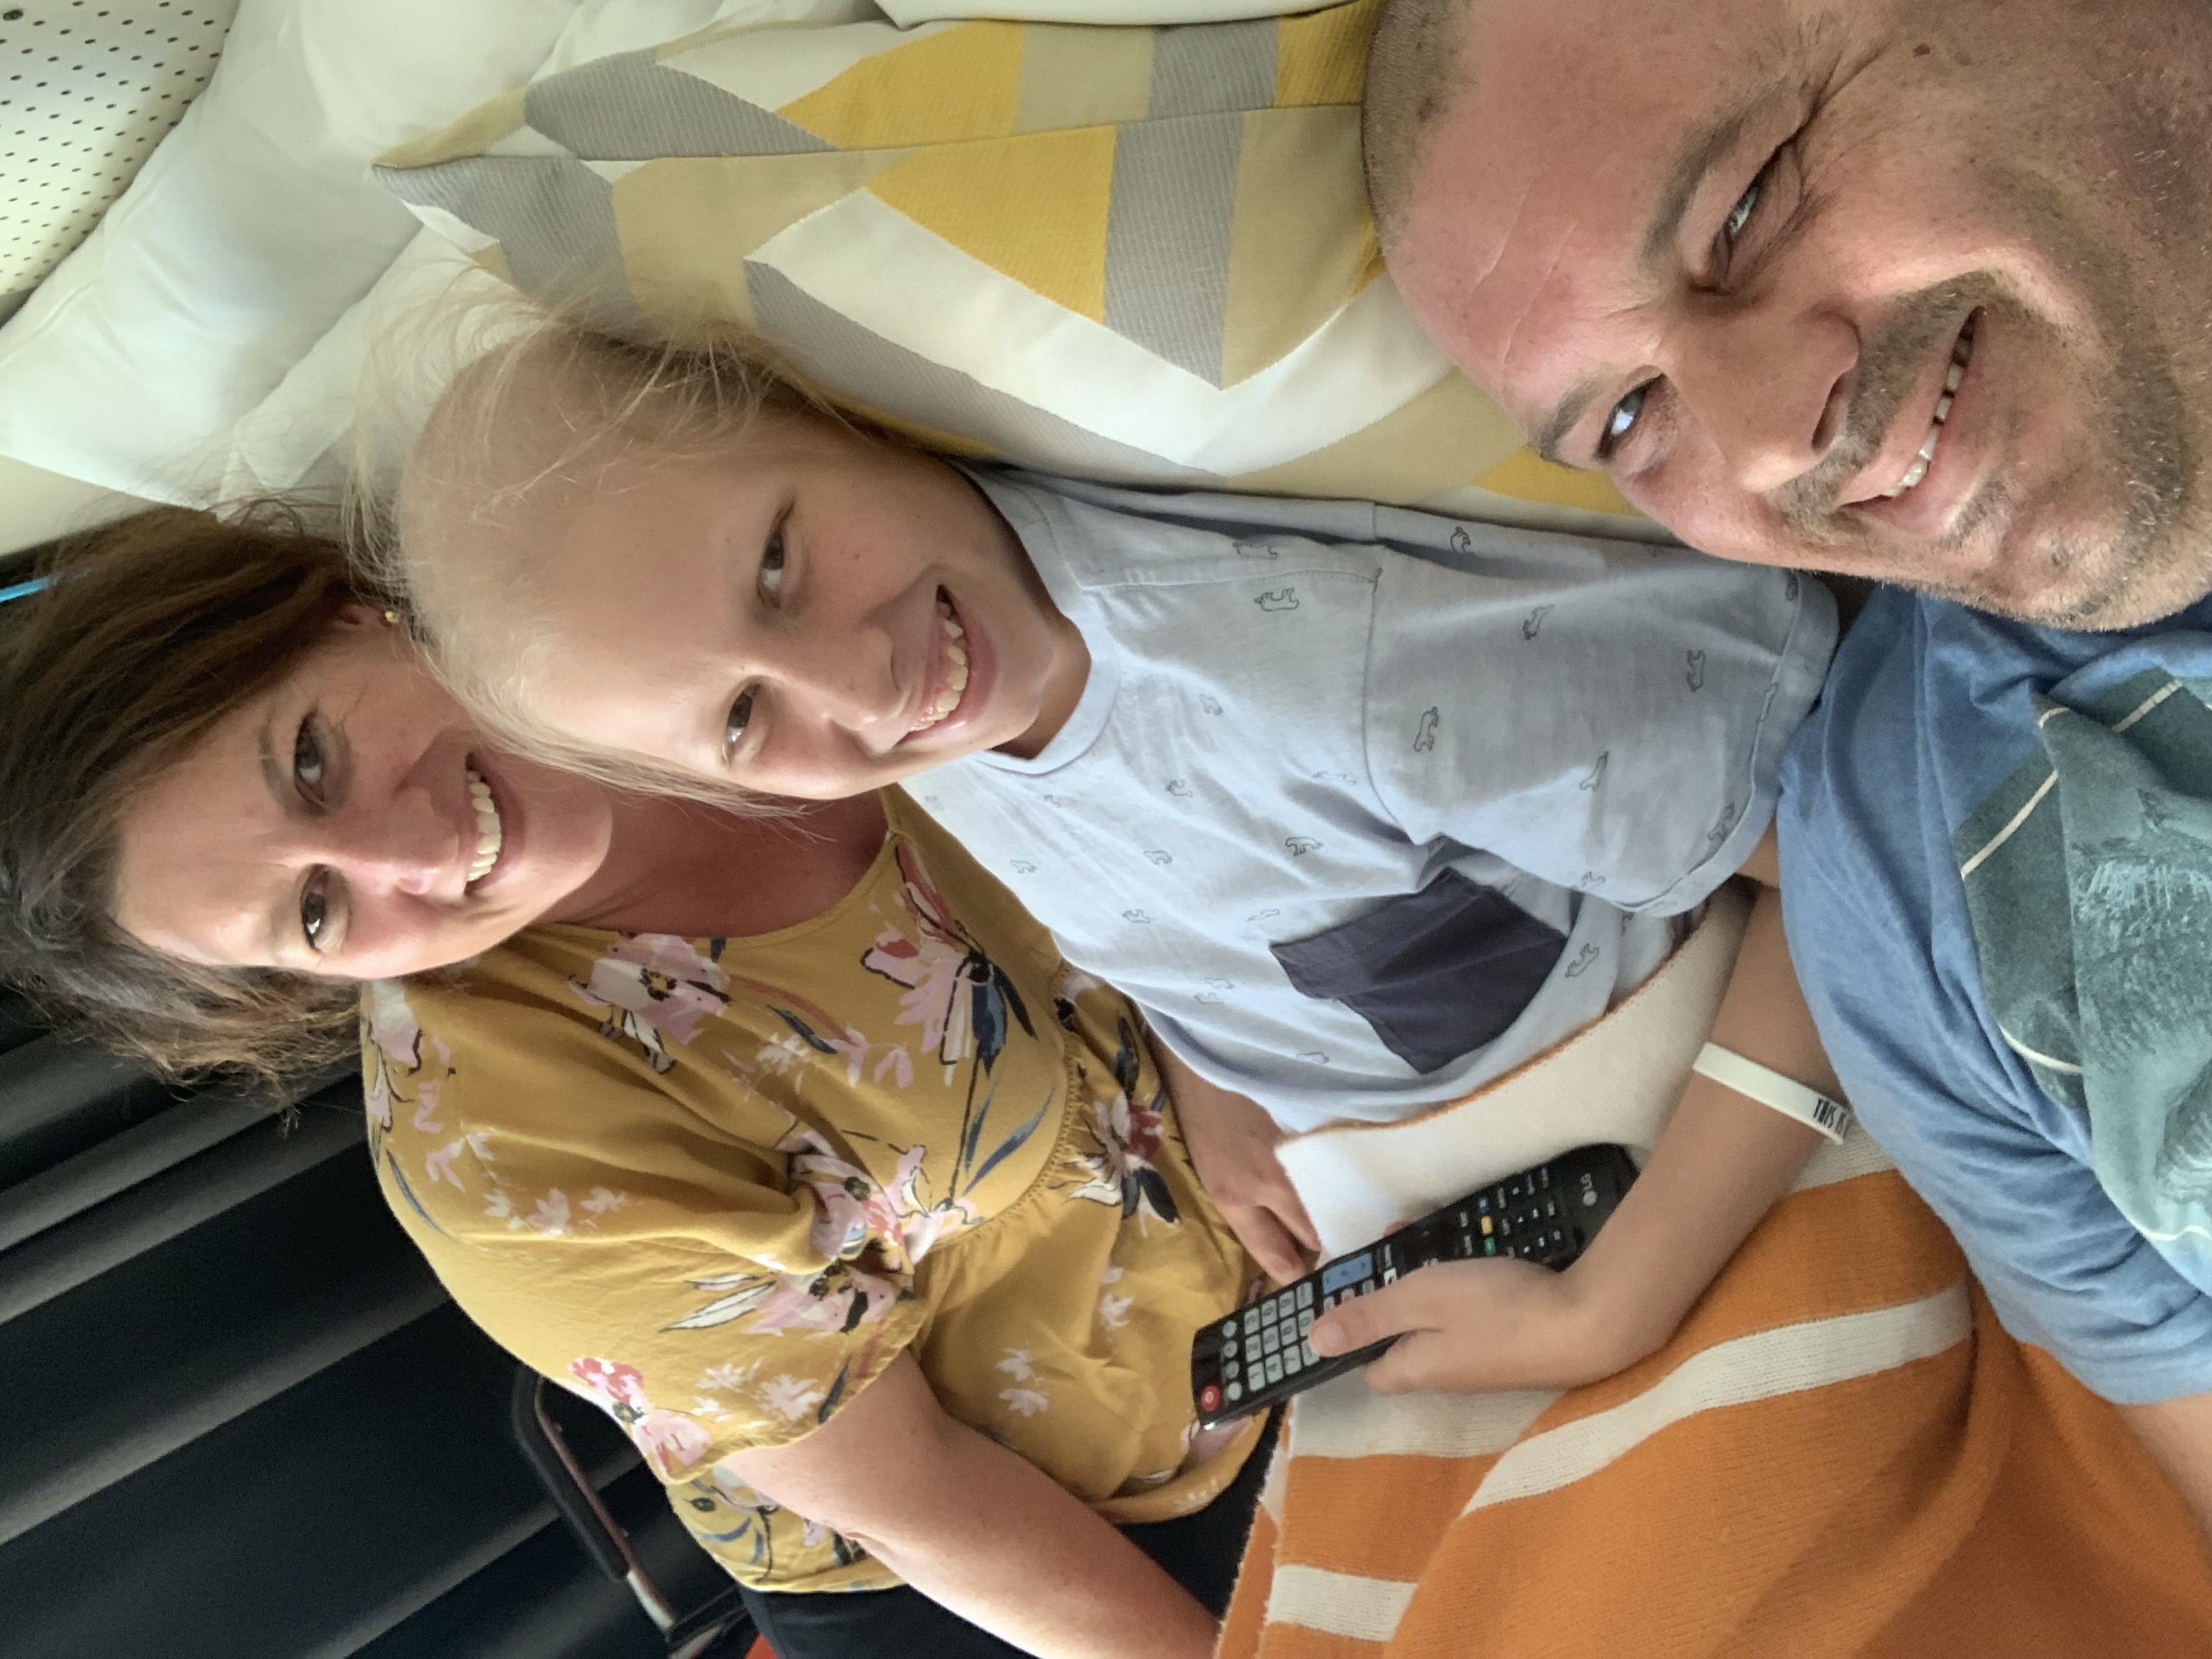 A smiling young teen boy in a hospital bed, with his parents on either side of him